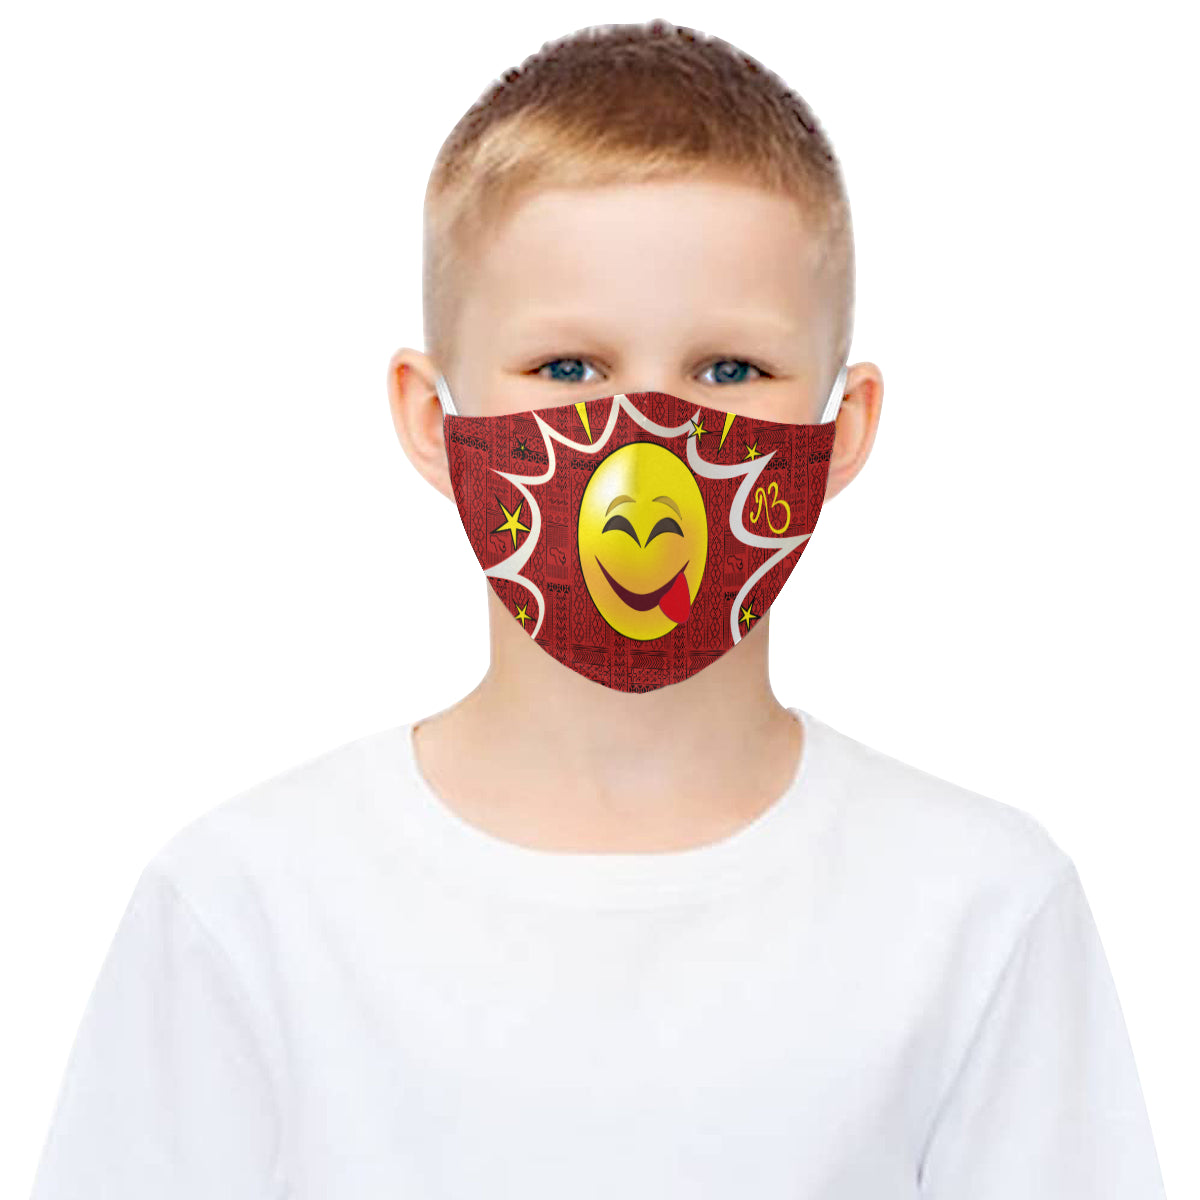 Cheeky Tribal Print Comic Emoji Cotton Fabric Face Mask with Filter Slot and Adjustable Strap - Non-medical use (2 Filters Included)